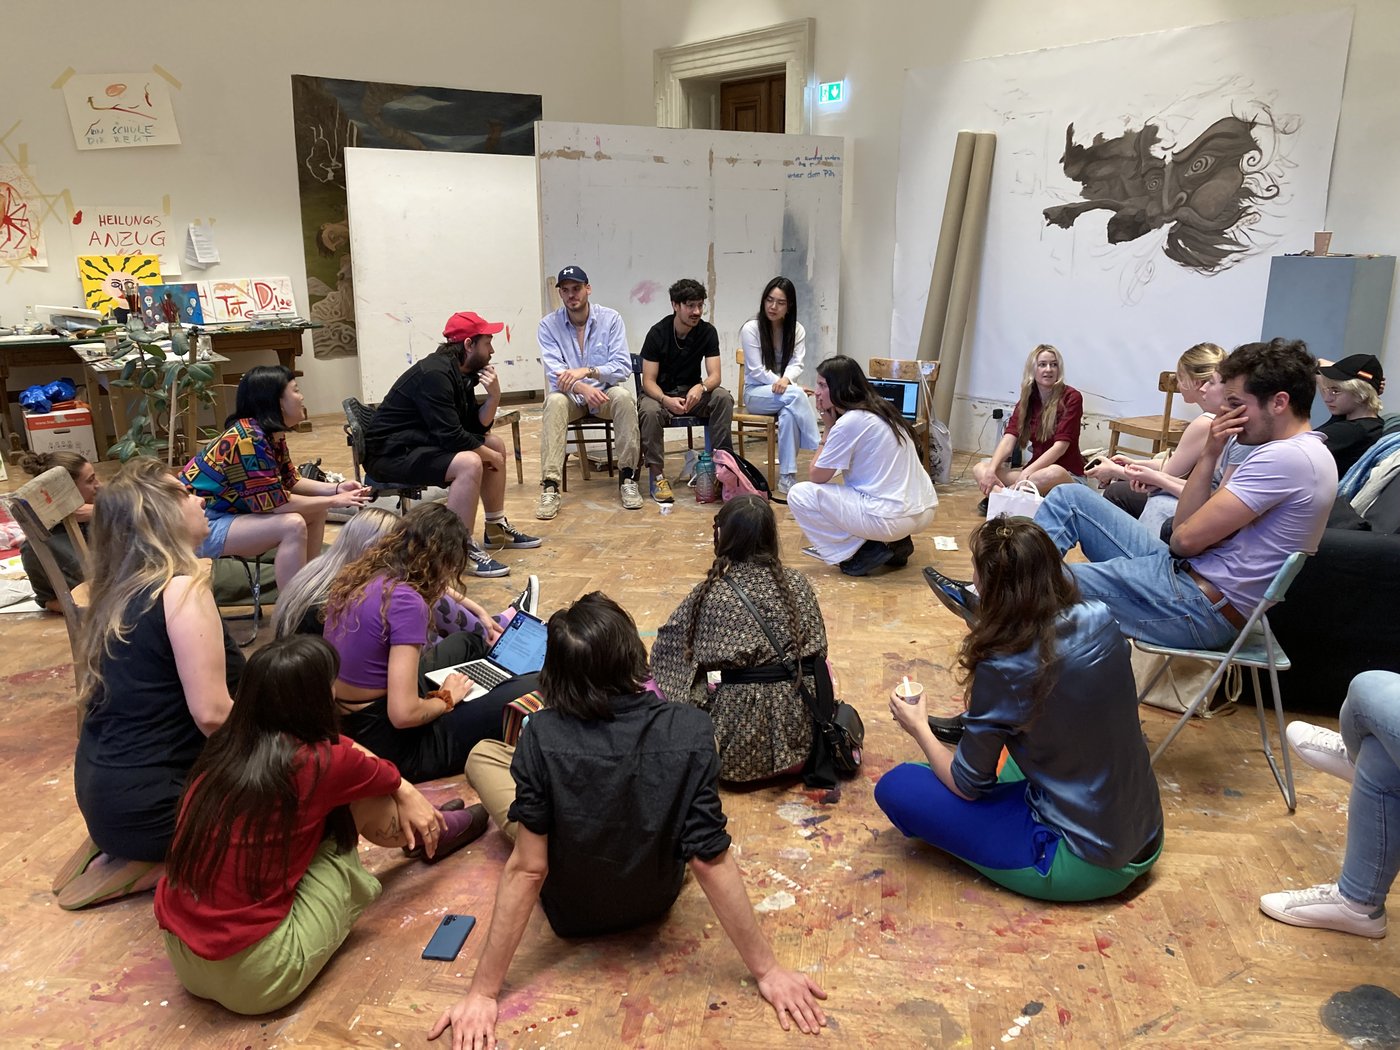 Class meeting of the department of figurative painting.18 Students of the class are gathered in room E 18 at Schillerplatz.They are discussing and exchanging ideas.  In the background are works in progress of Gregor Hagenauer and Bergur Nordal.